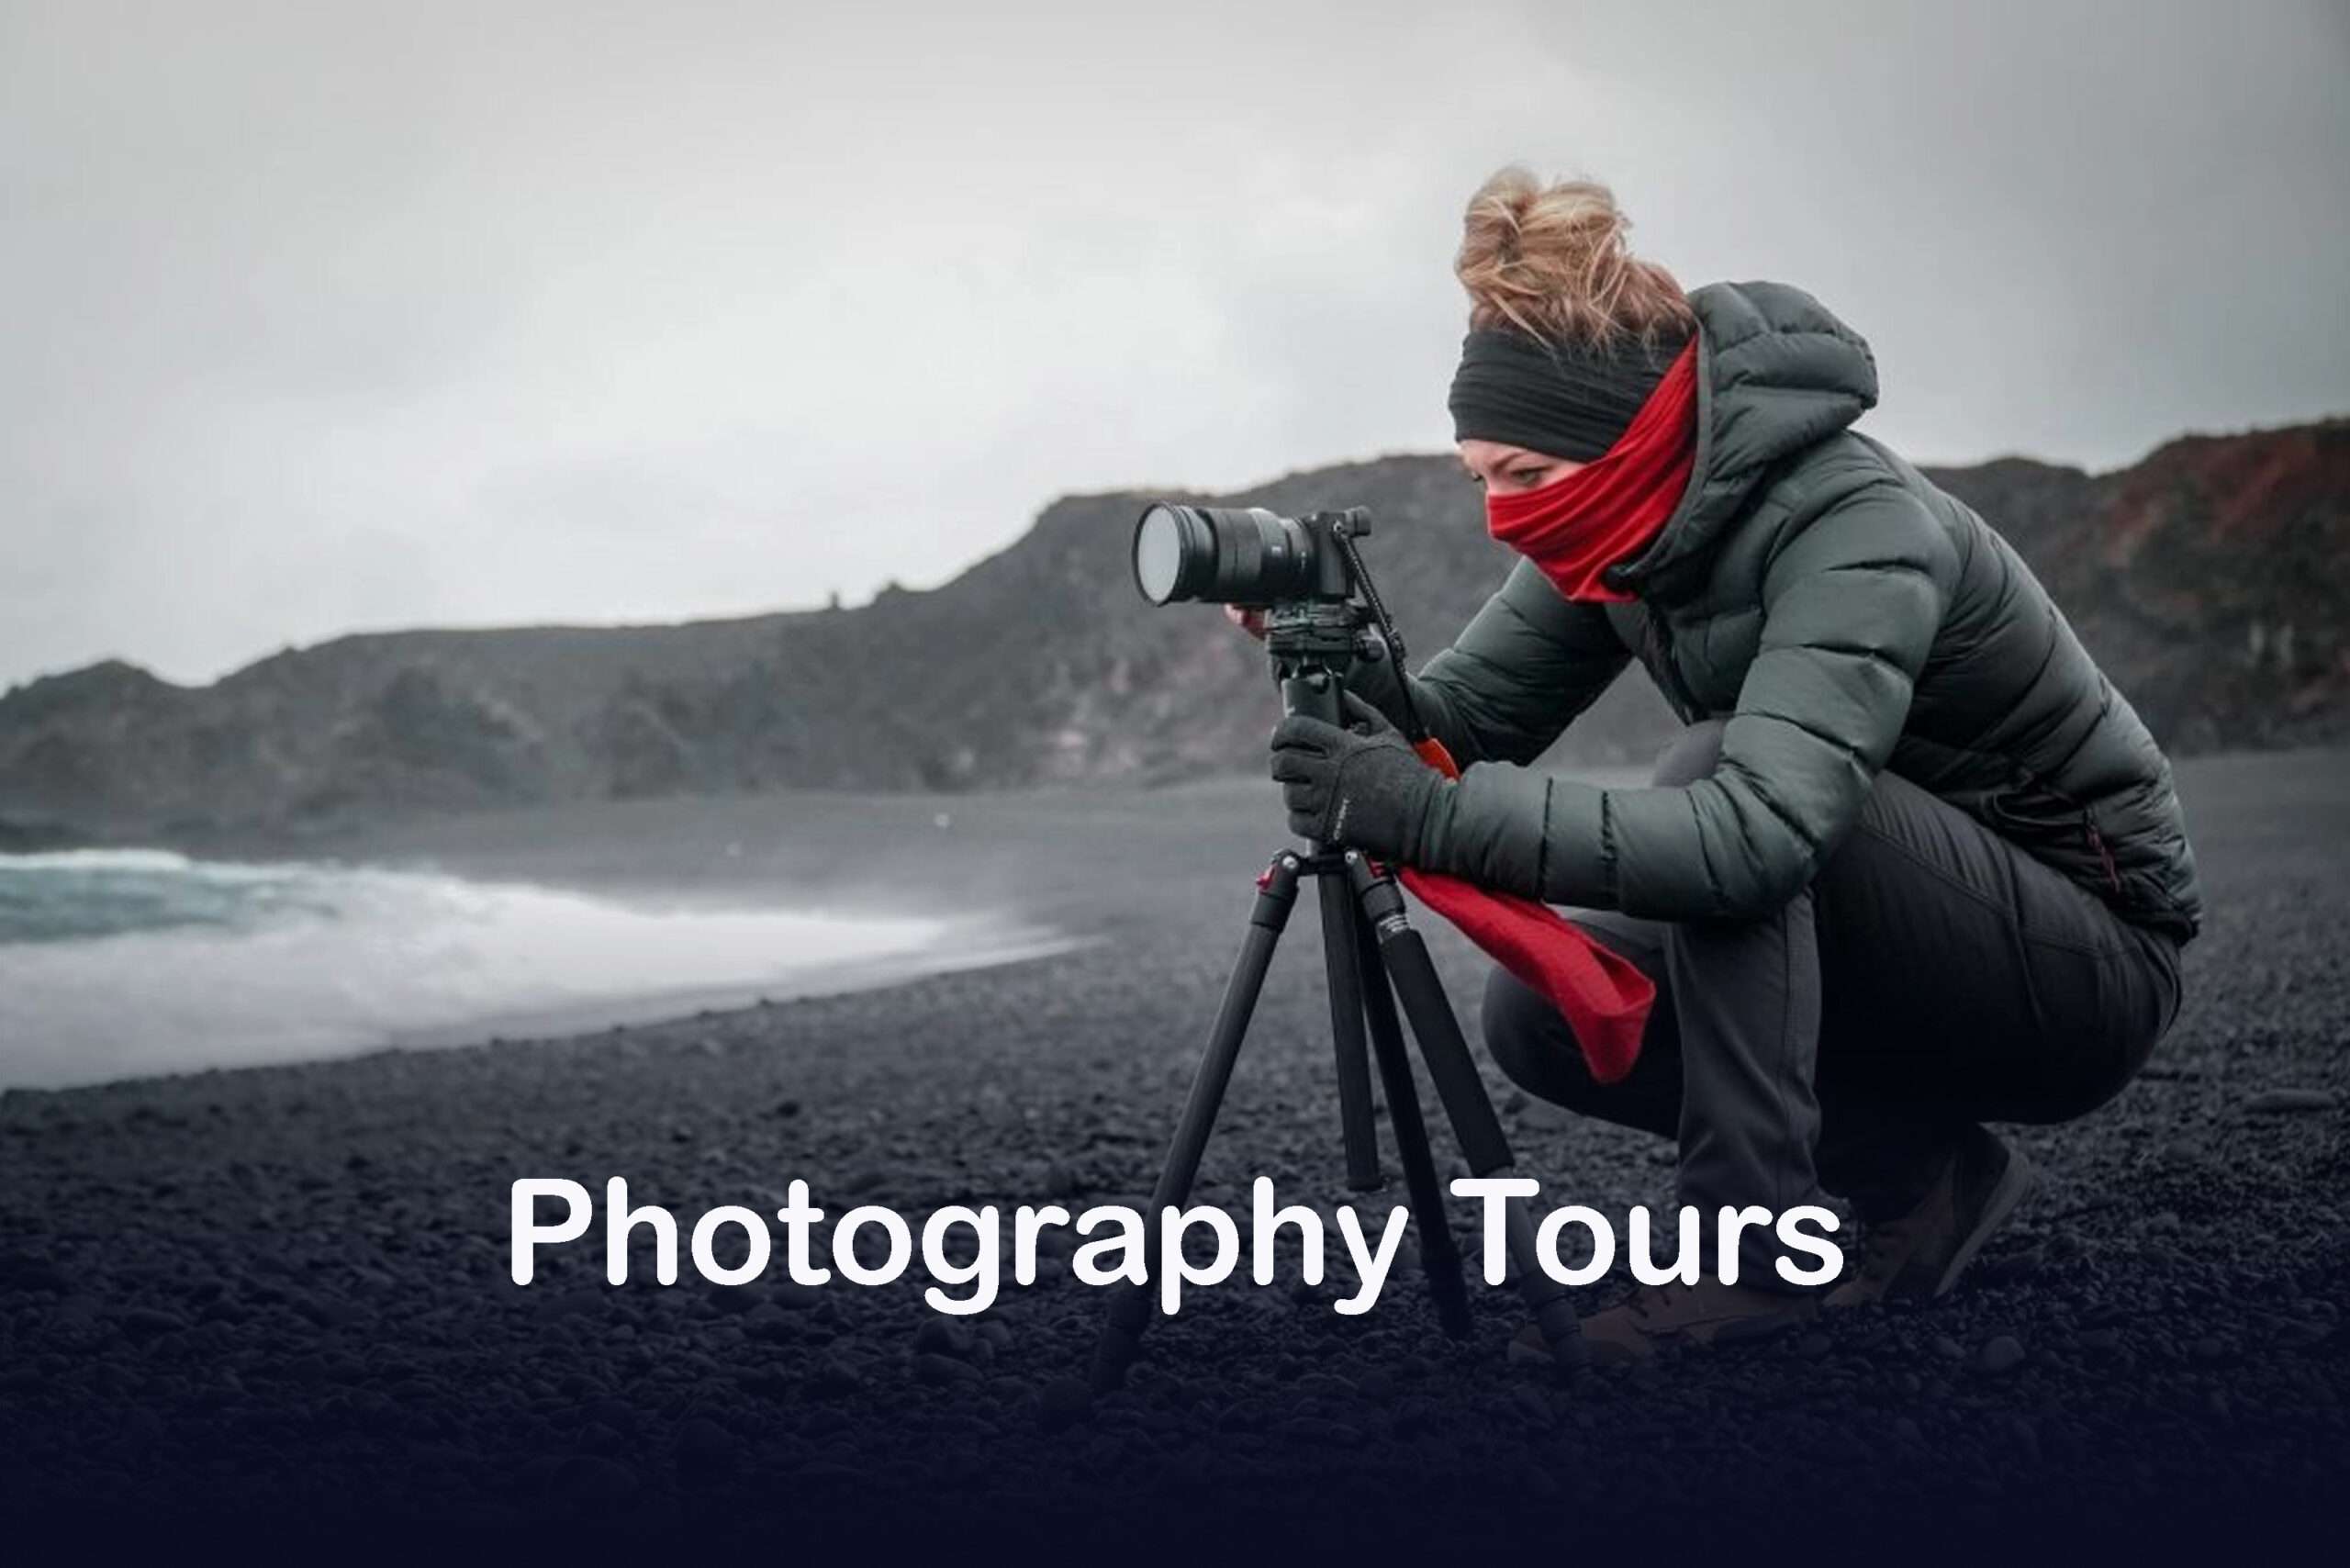 Photography tours